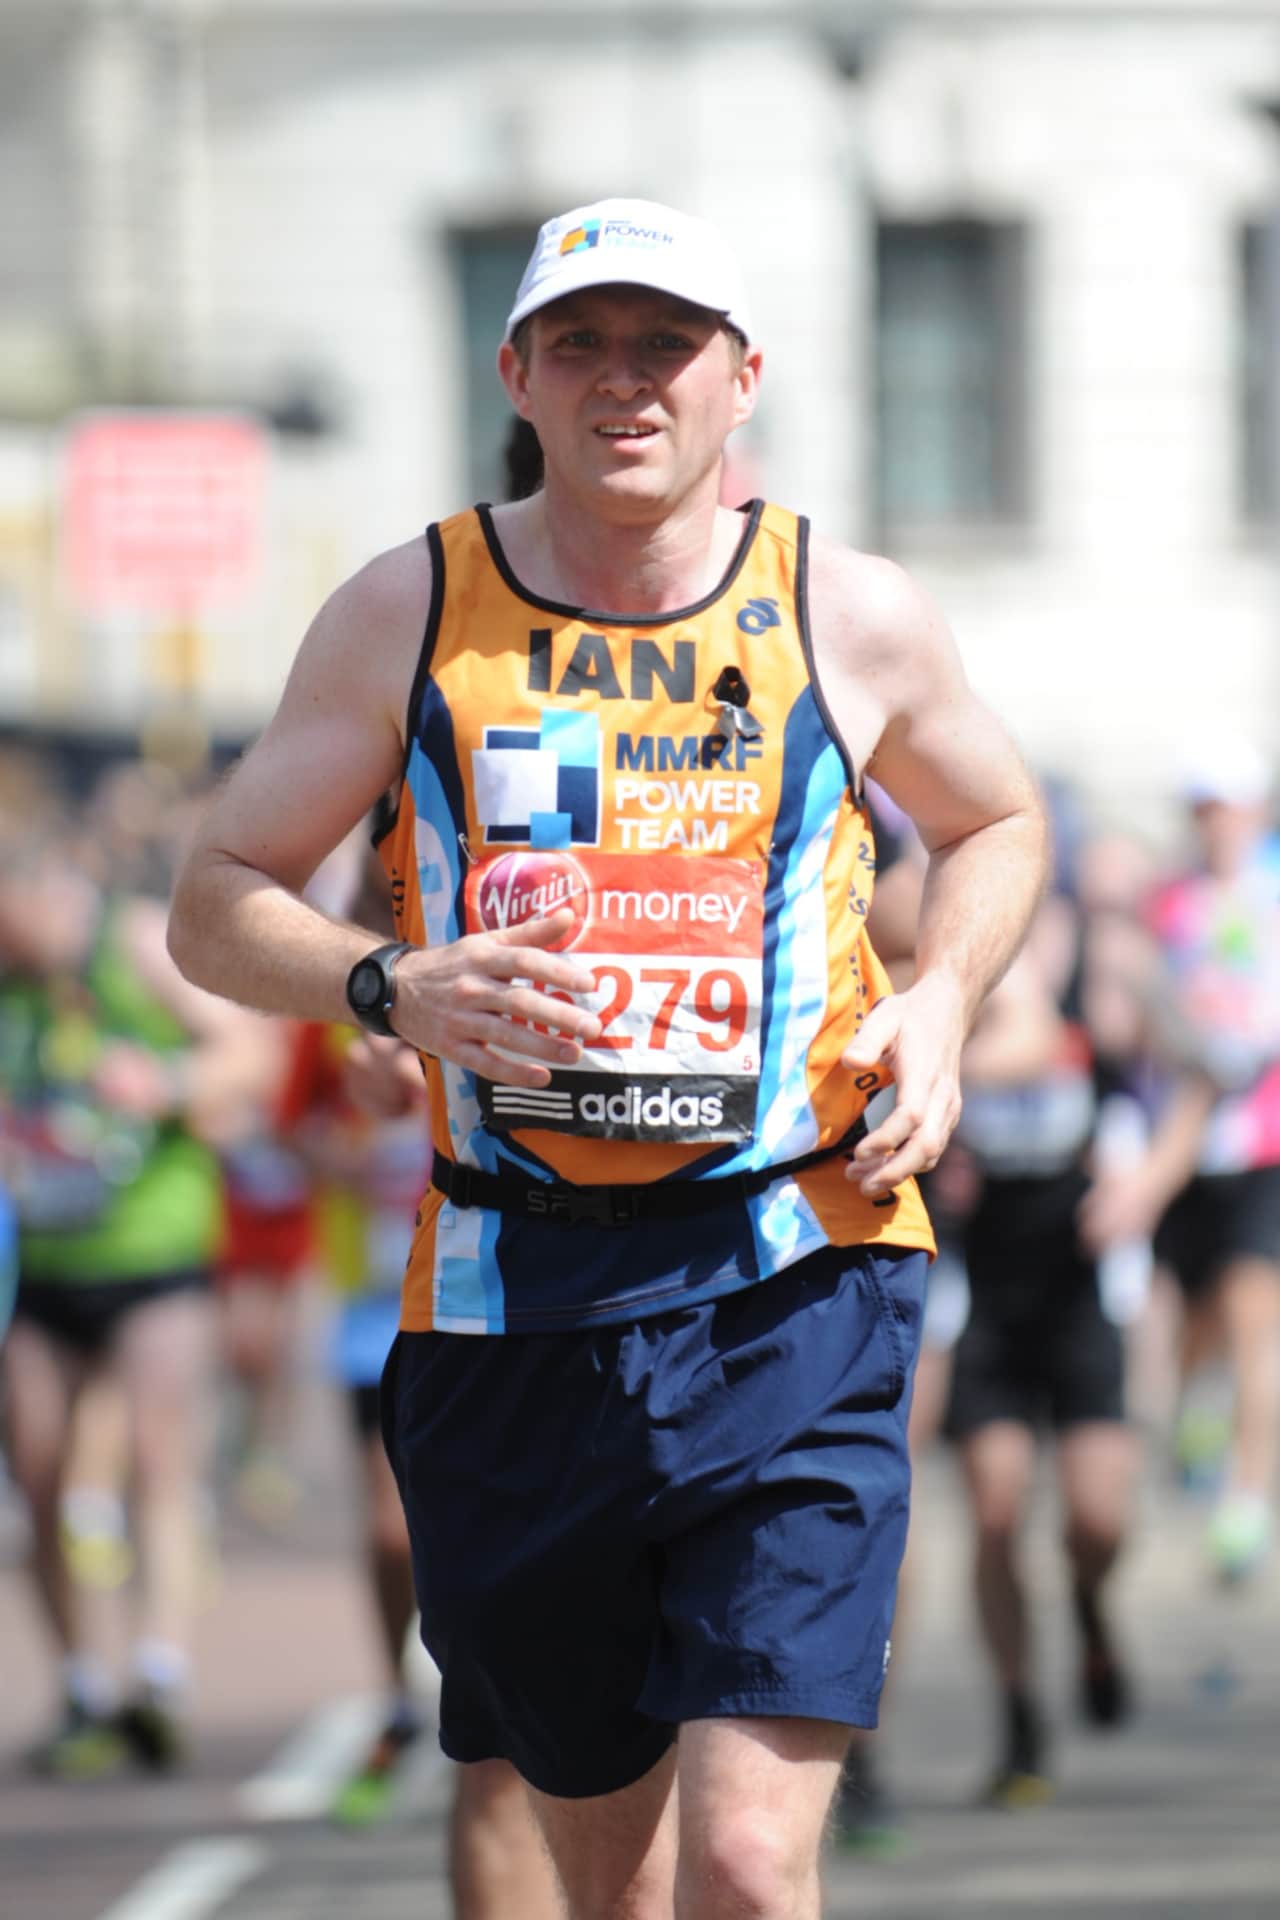 Ian Duplock of New Canaan ran in the London Marathon on Sunday, less than a week after the tragedy at the Boston Marathon.